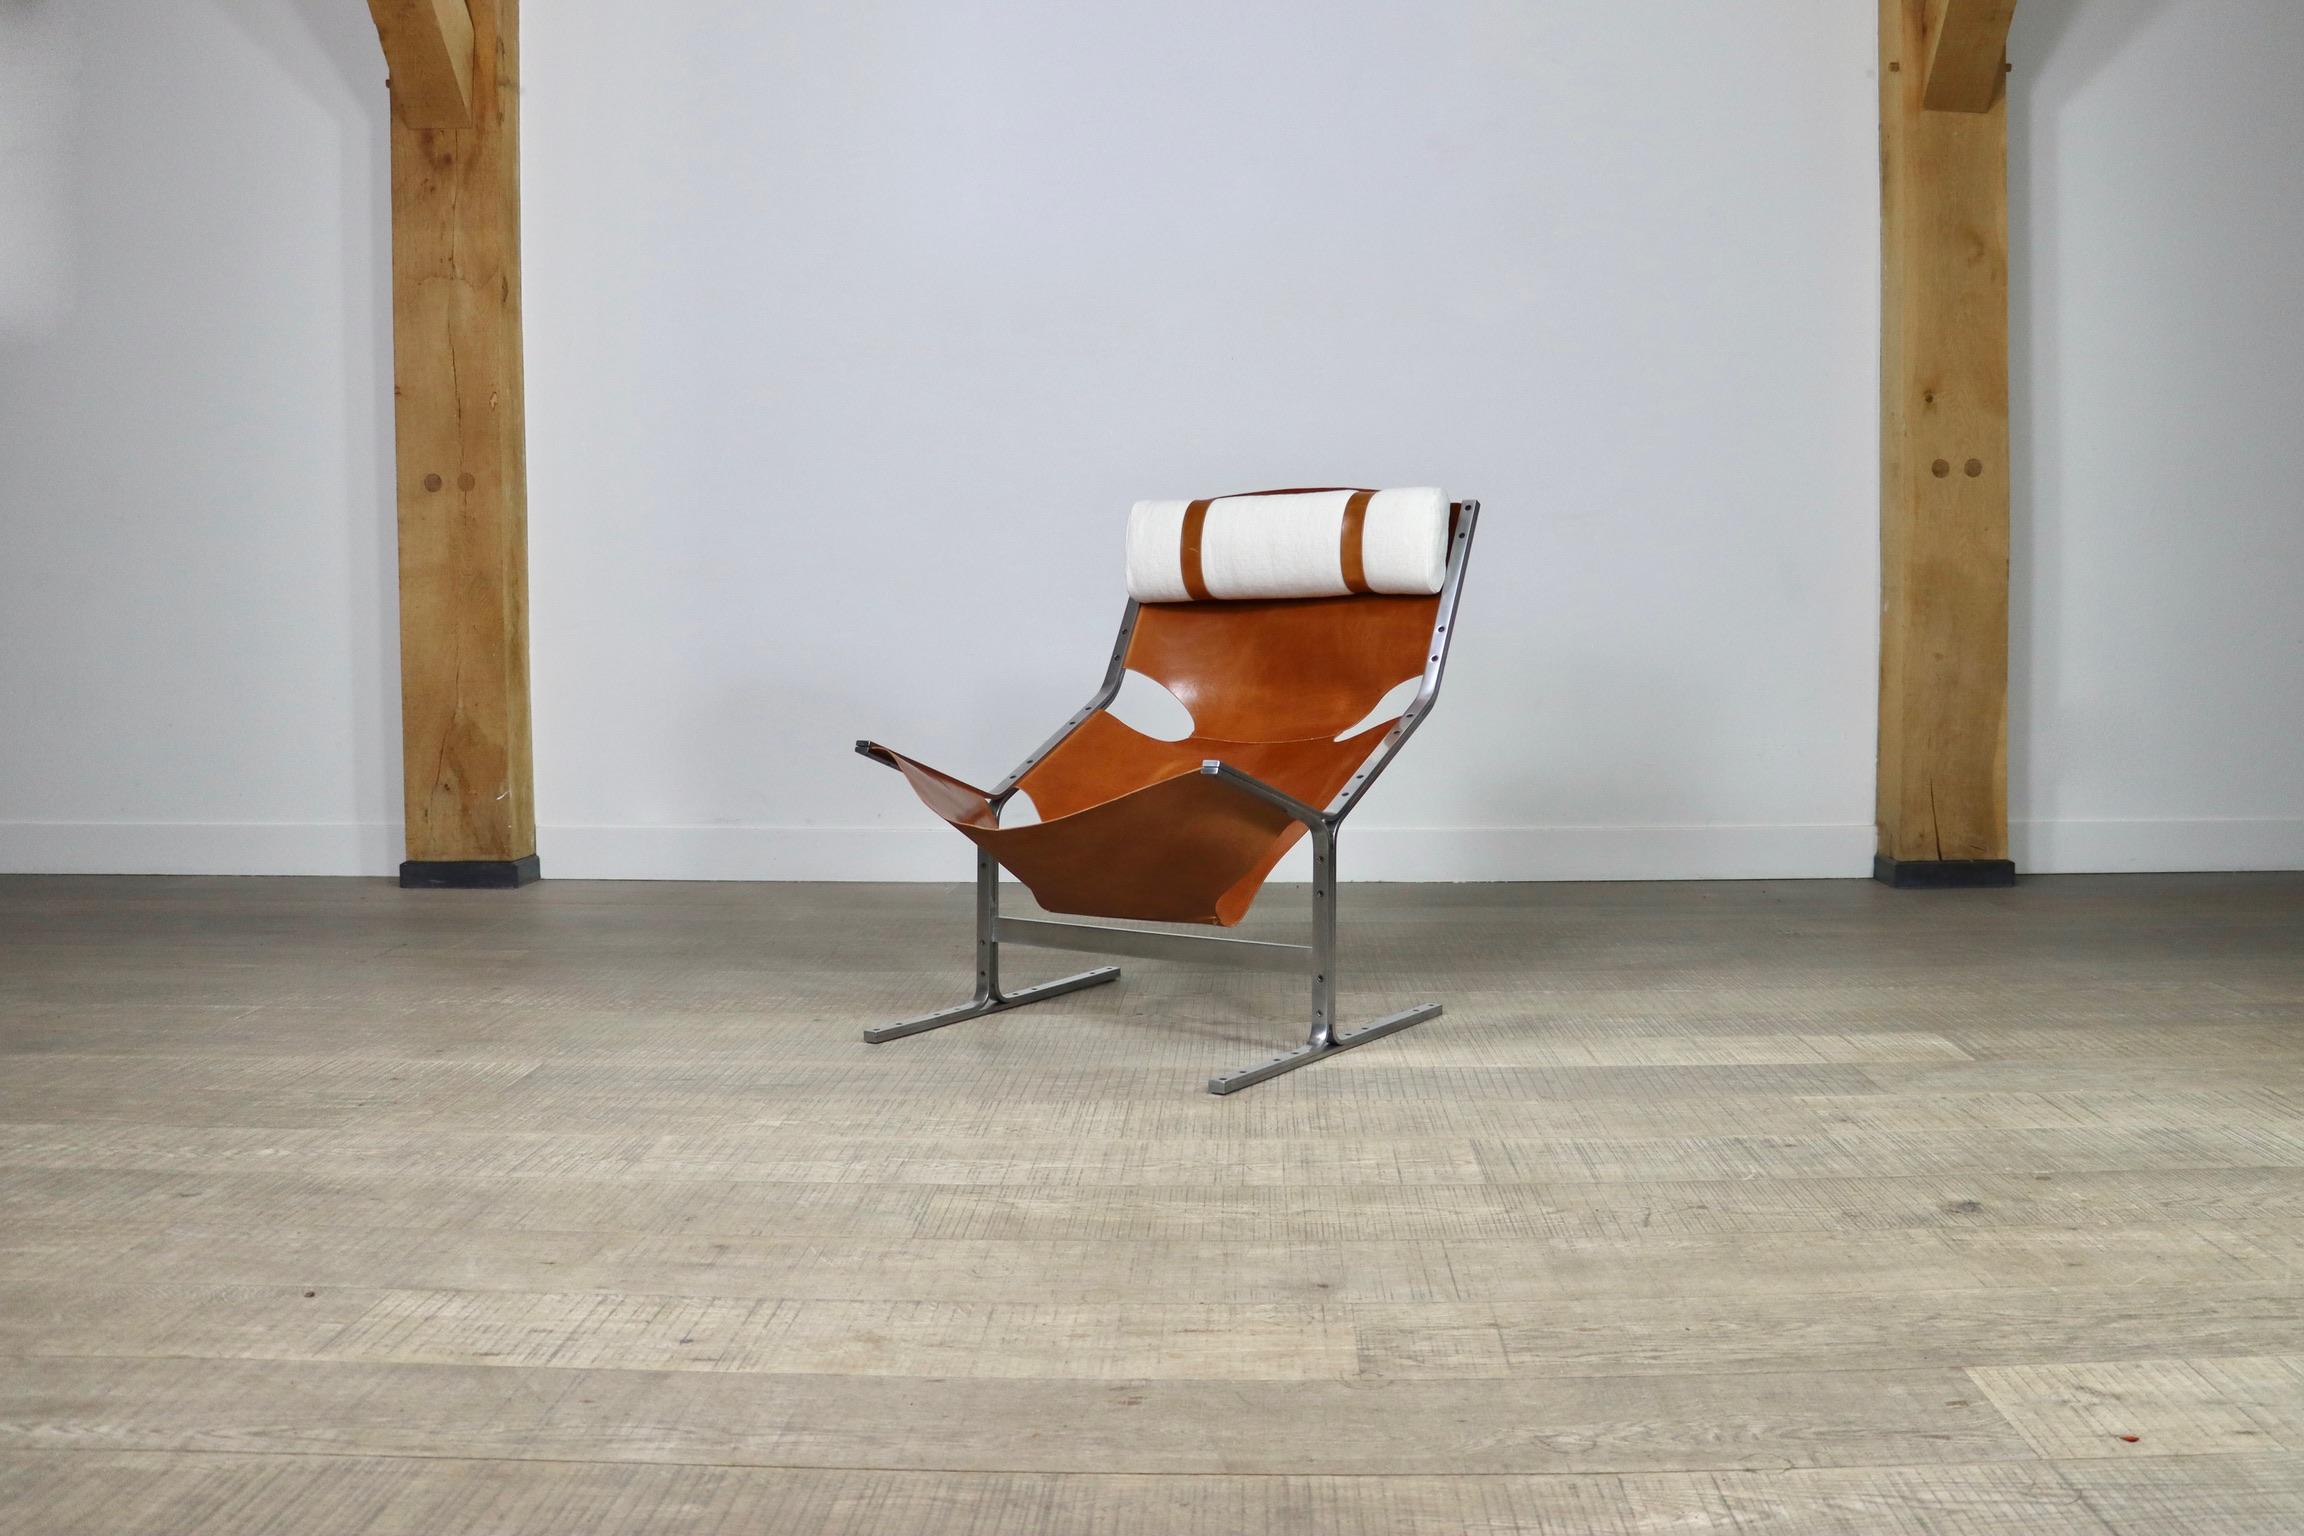 Stainless Steel Pierre Thielen Lounge Chair In Cognac Leather, Metz & Co, 1960s